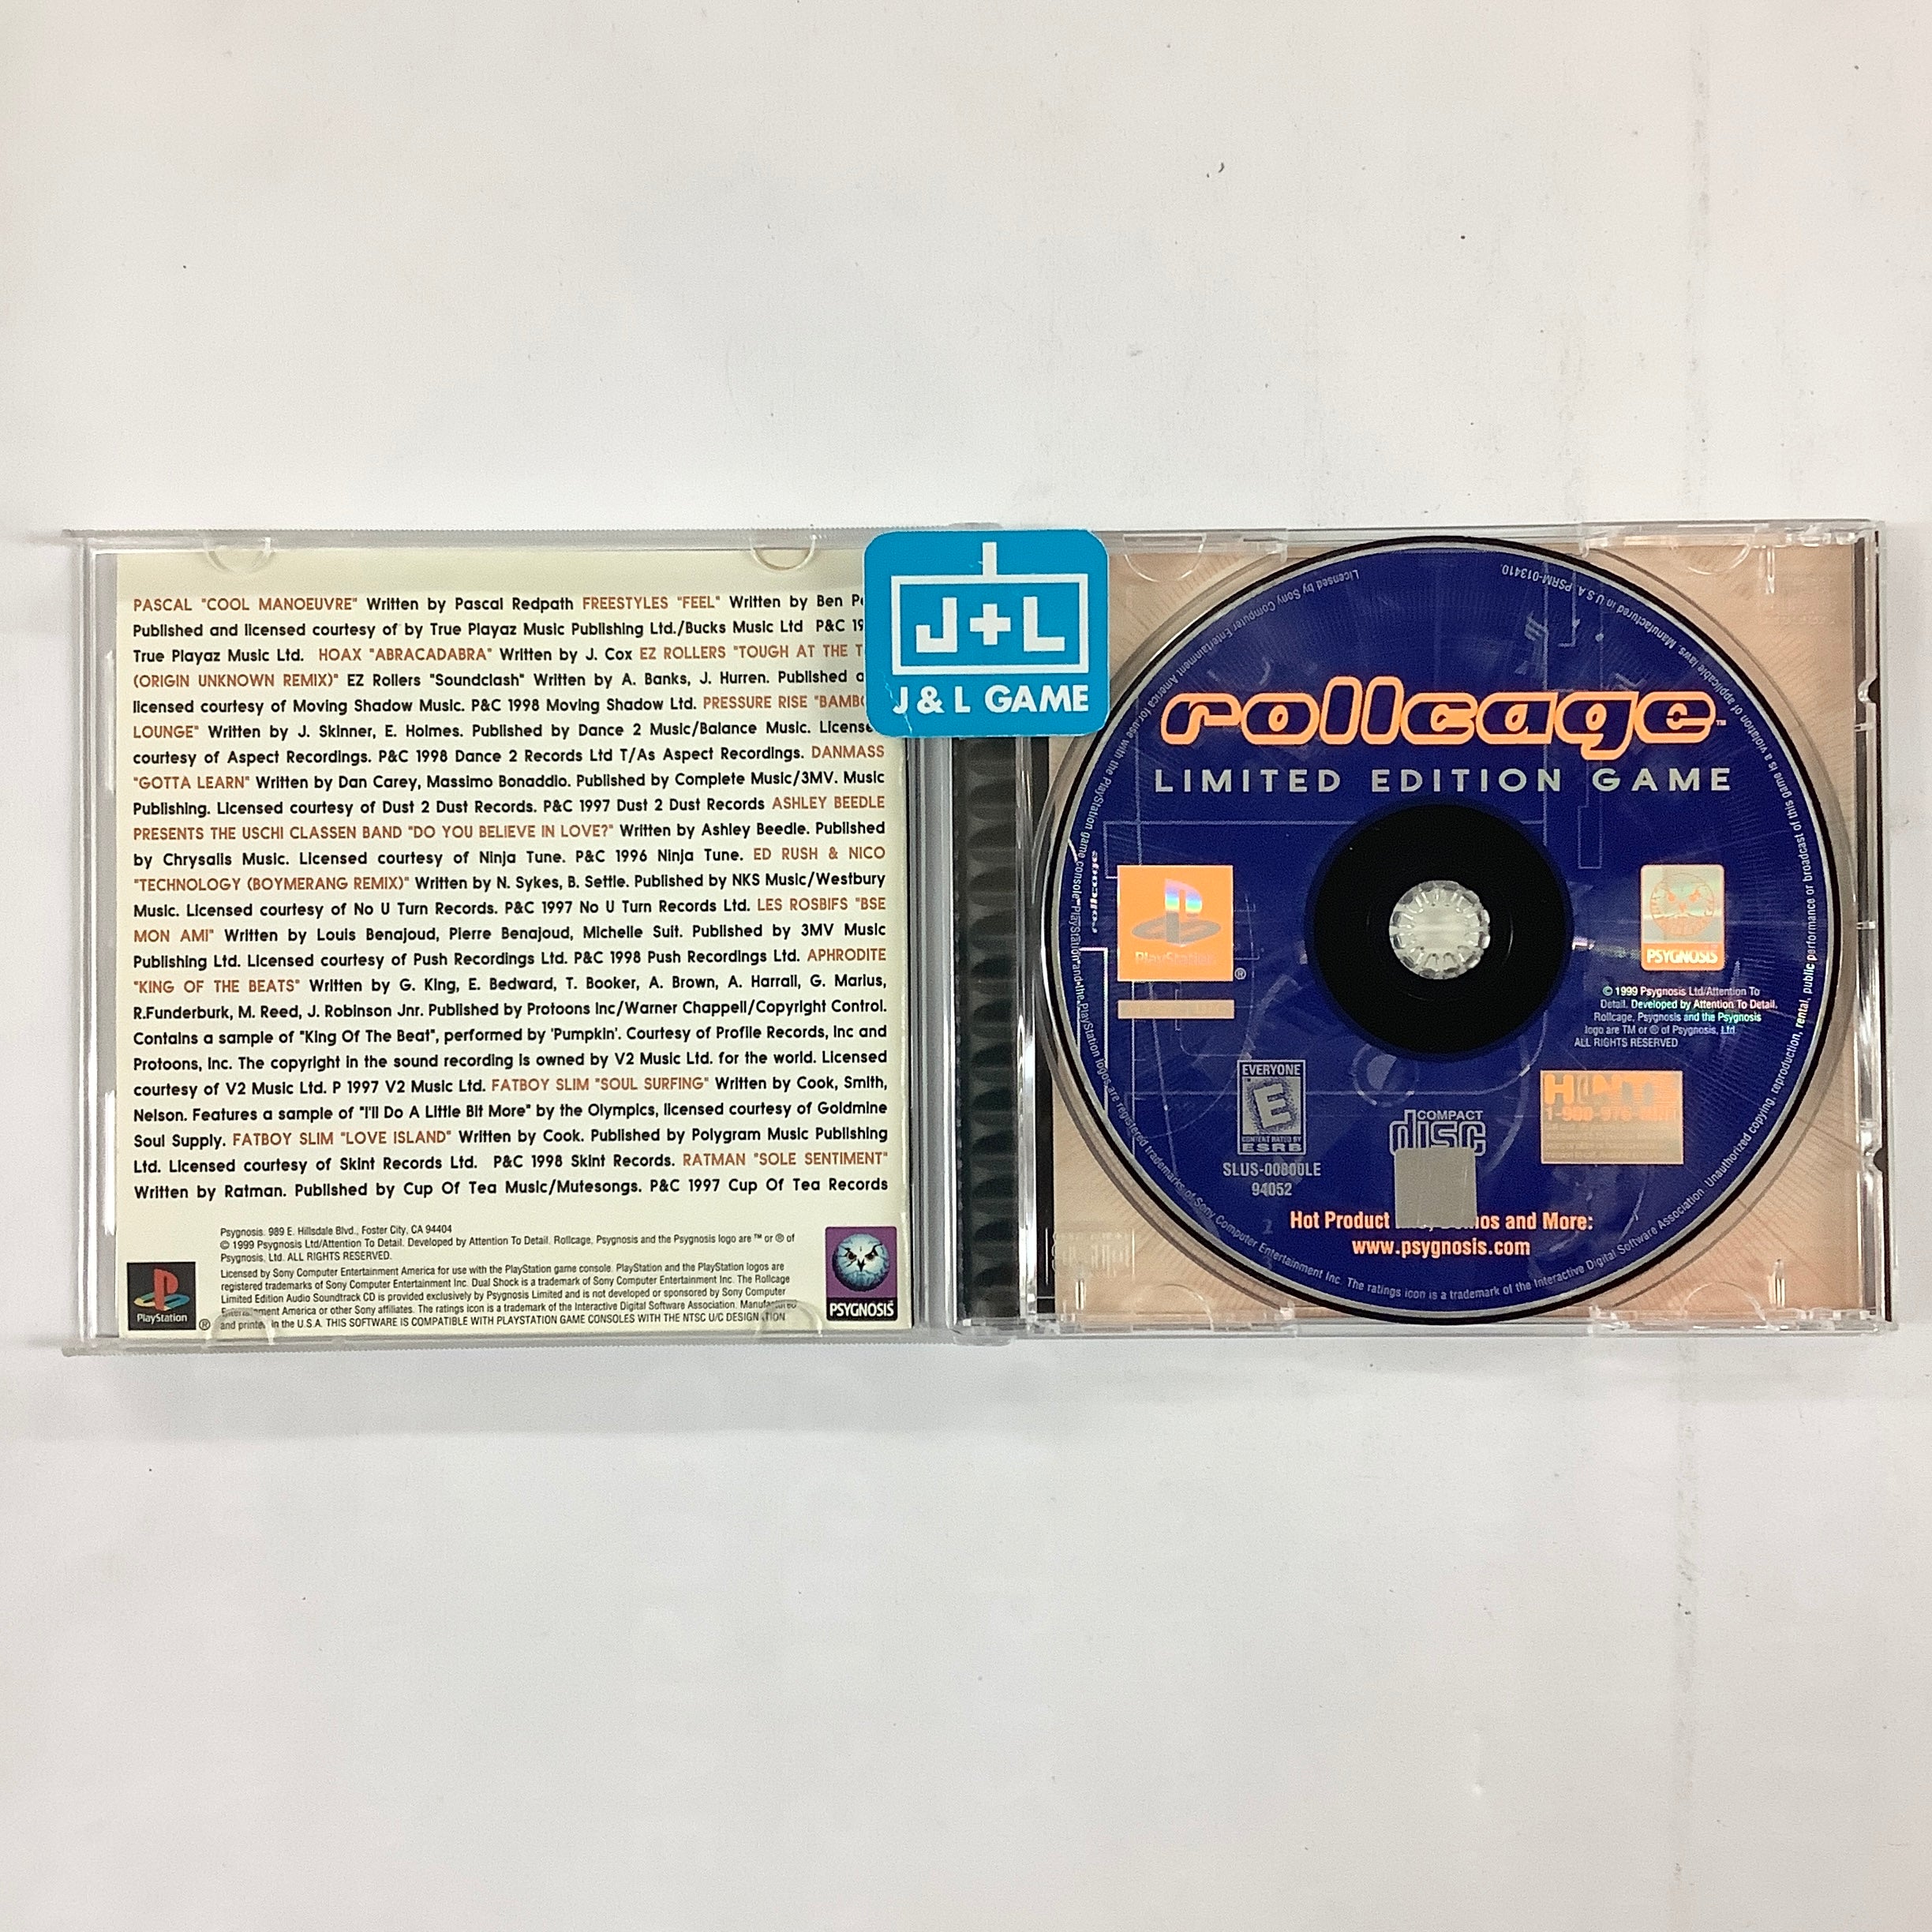 Rollcage (Limited Edition) - (PS1) PlayStation 1 [Pre-Owned] Video Games Psygnosis   